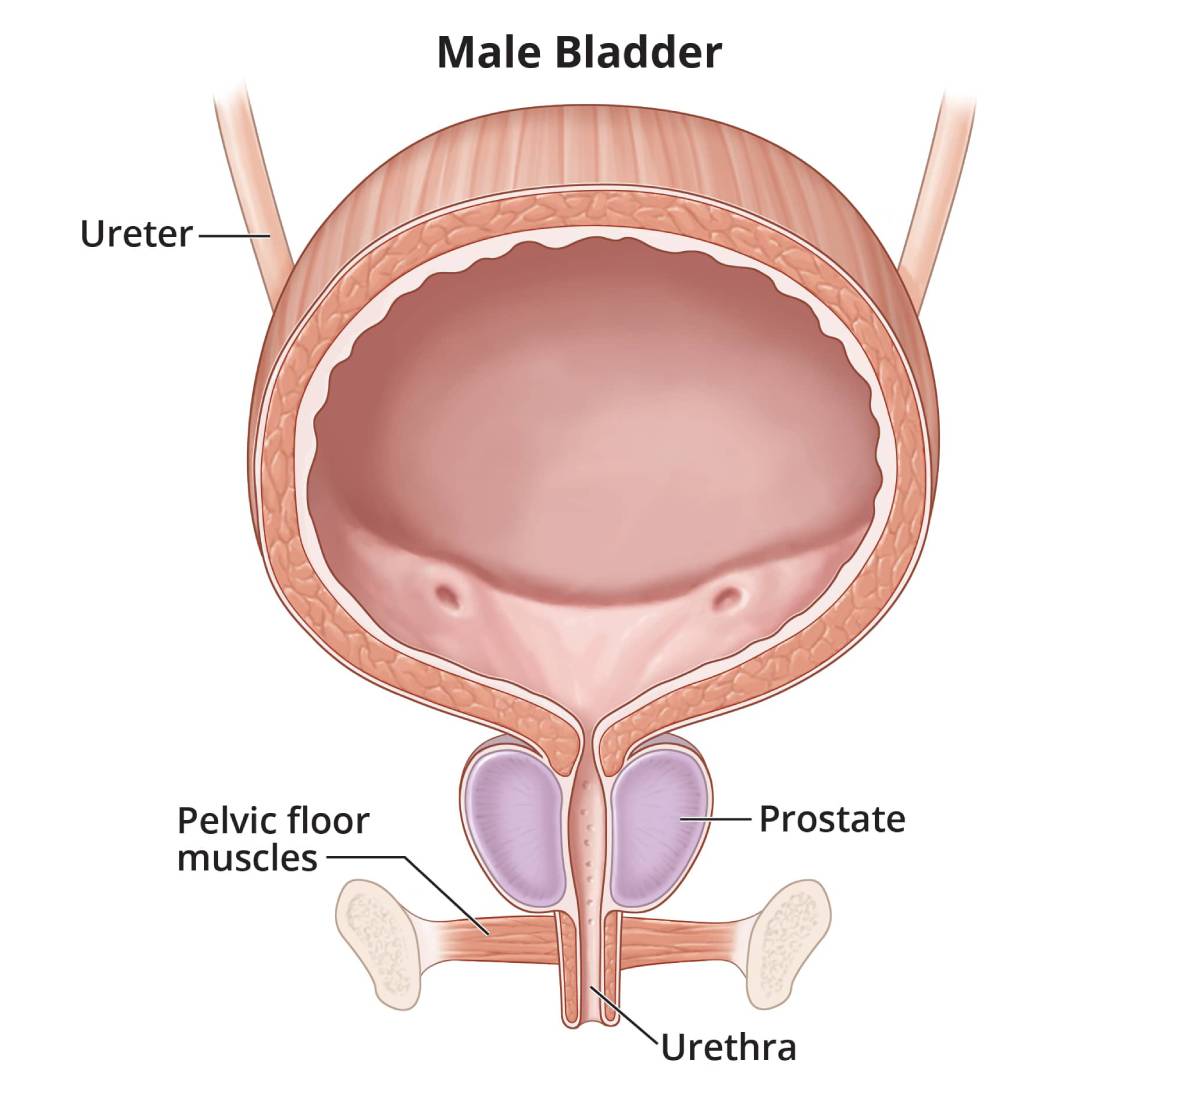 Close-up illustration of a male urinary tract, including the bladder, ureters, pelvic floor muscles, and urethra, and showing the prostate.